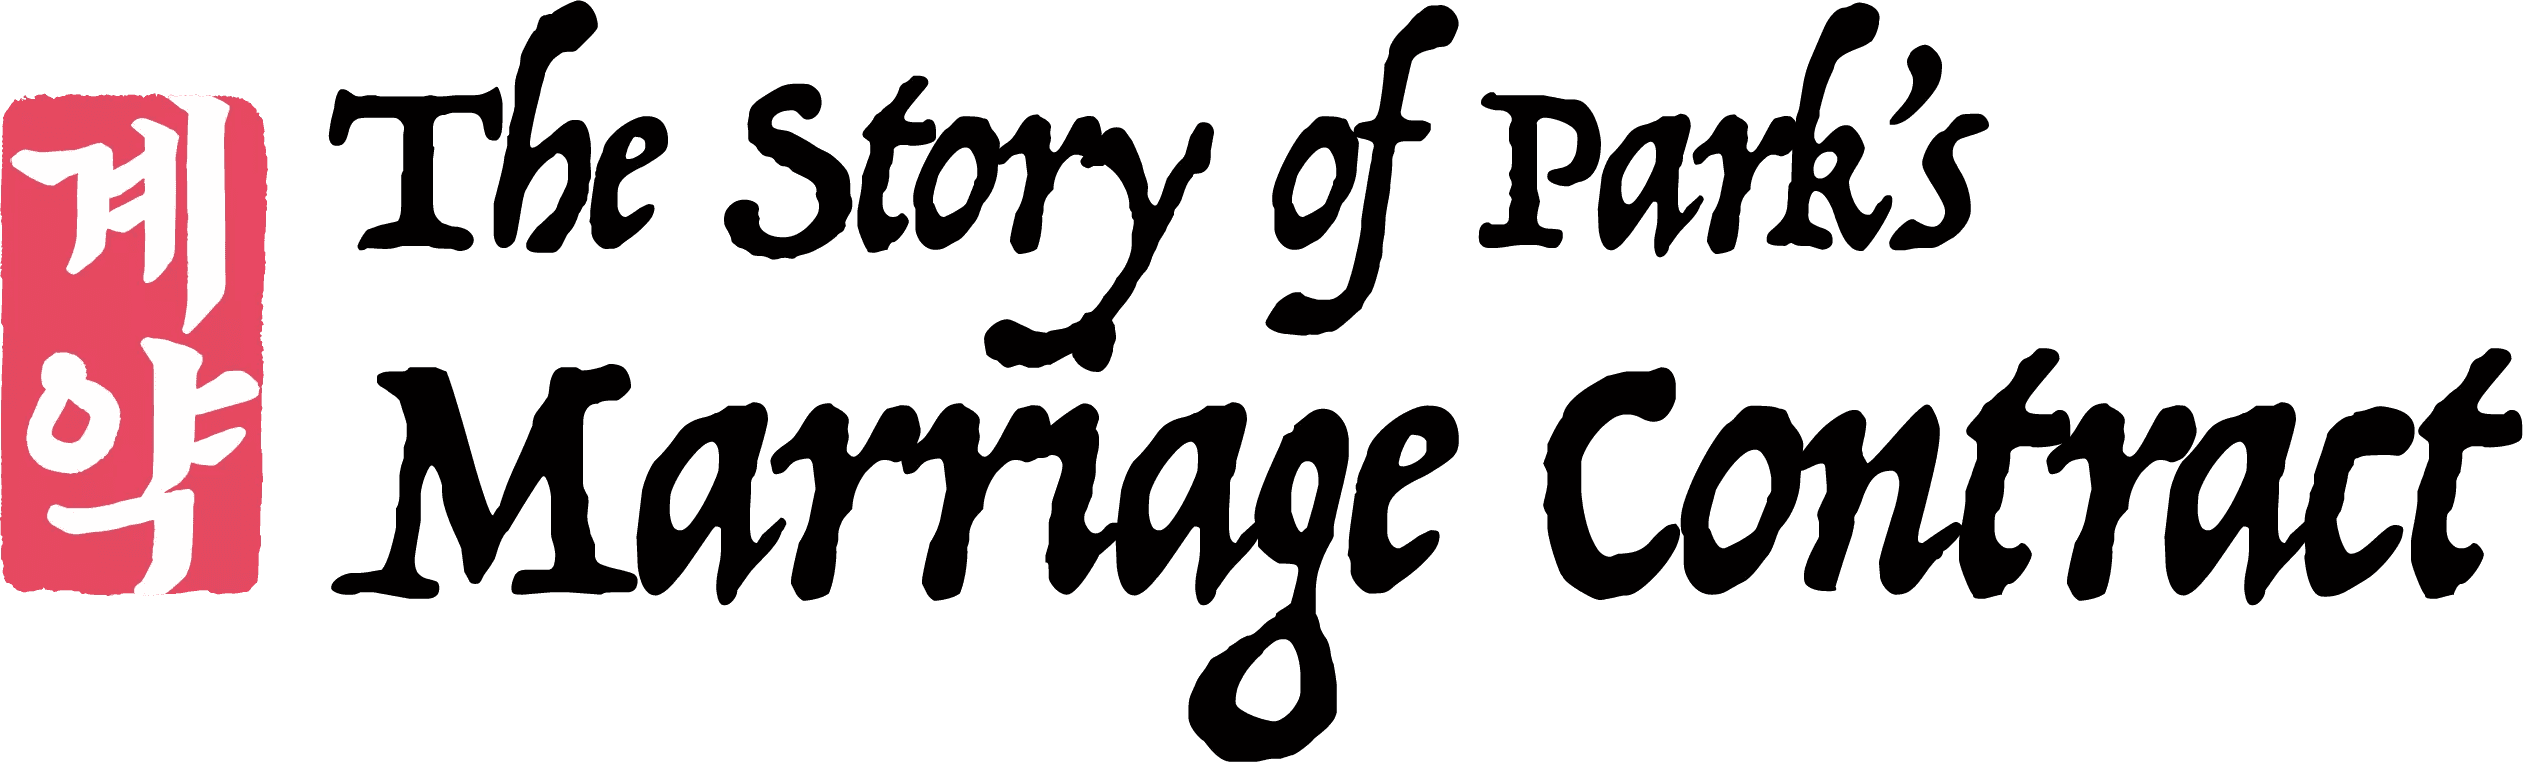 The Story of Park's Marriage Contract logo